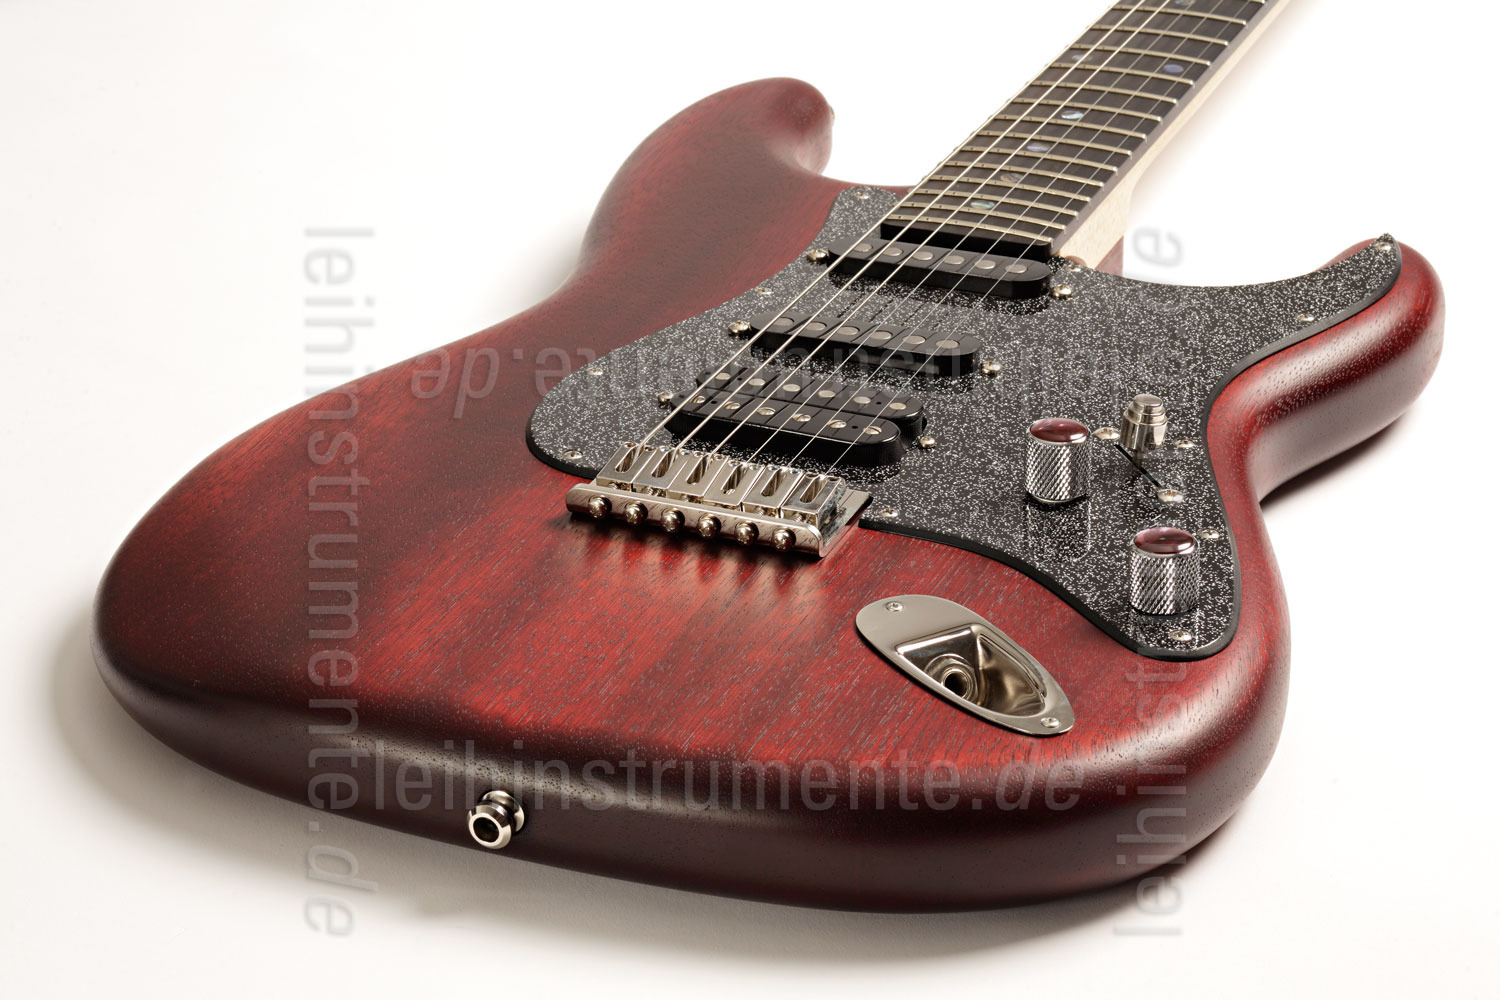 to article description / price Electric Guitar BERSTECHER Deluxe - Black Cherry / Black Sparkle + hard case - made in Germany